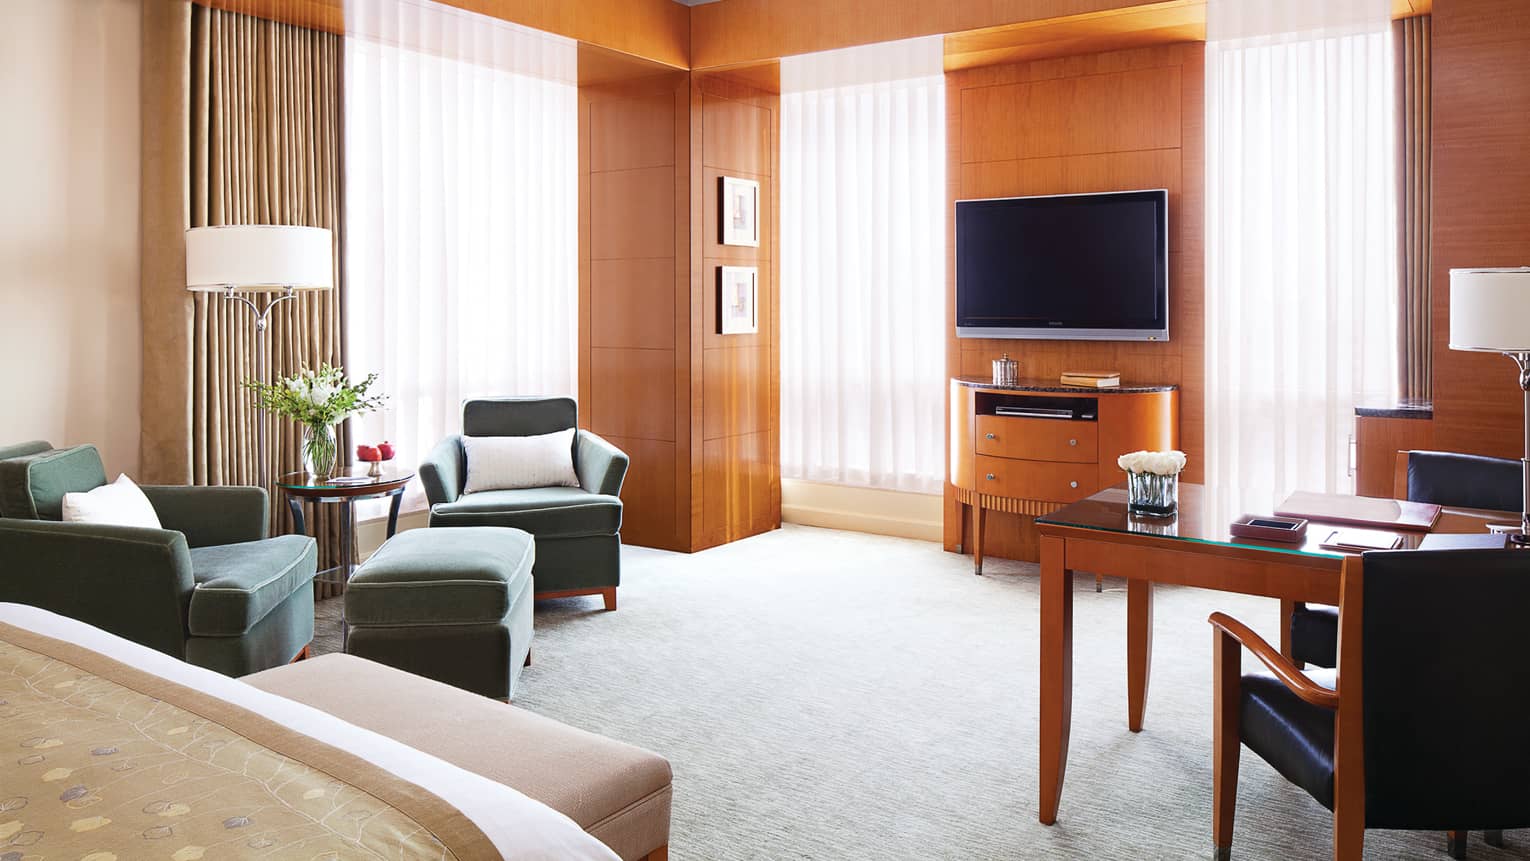 Executive Premier Room wood panel walls, sunny windows with sheer curtains, bed, TV, chairs